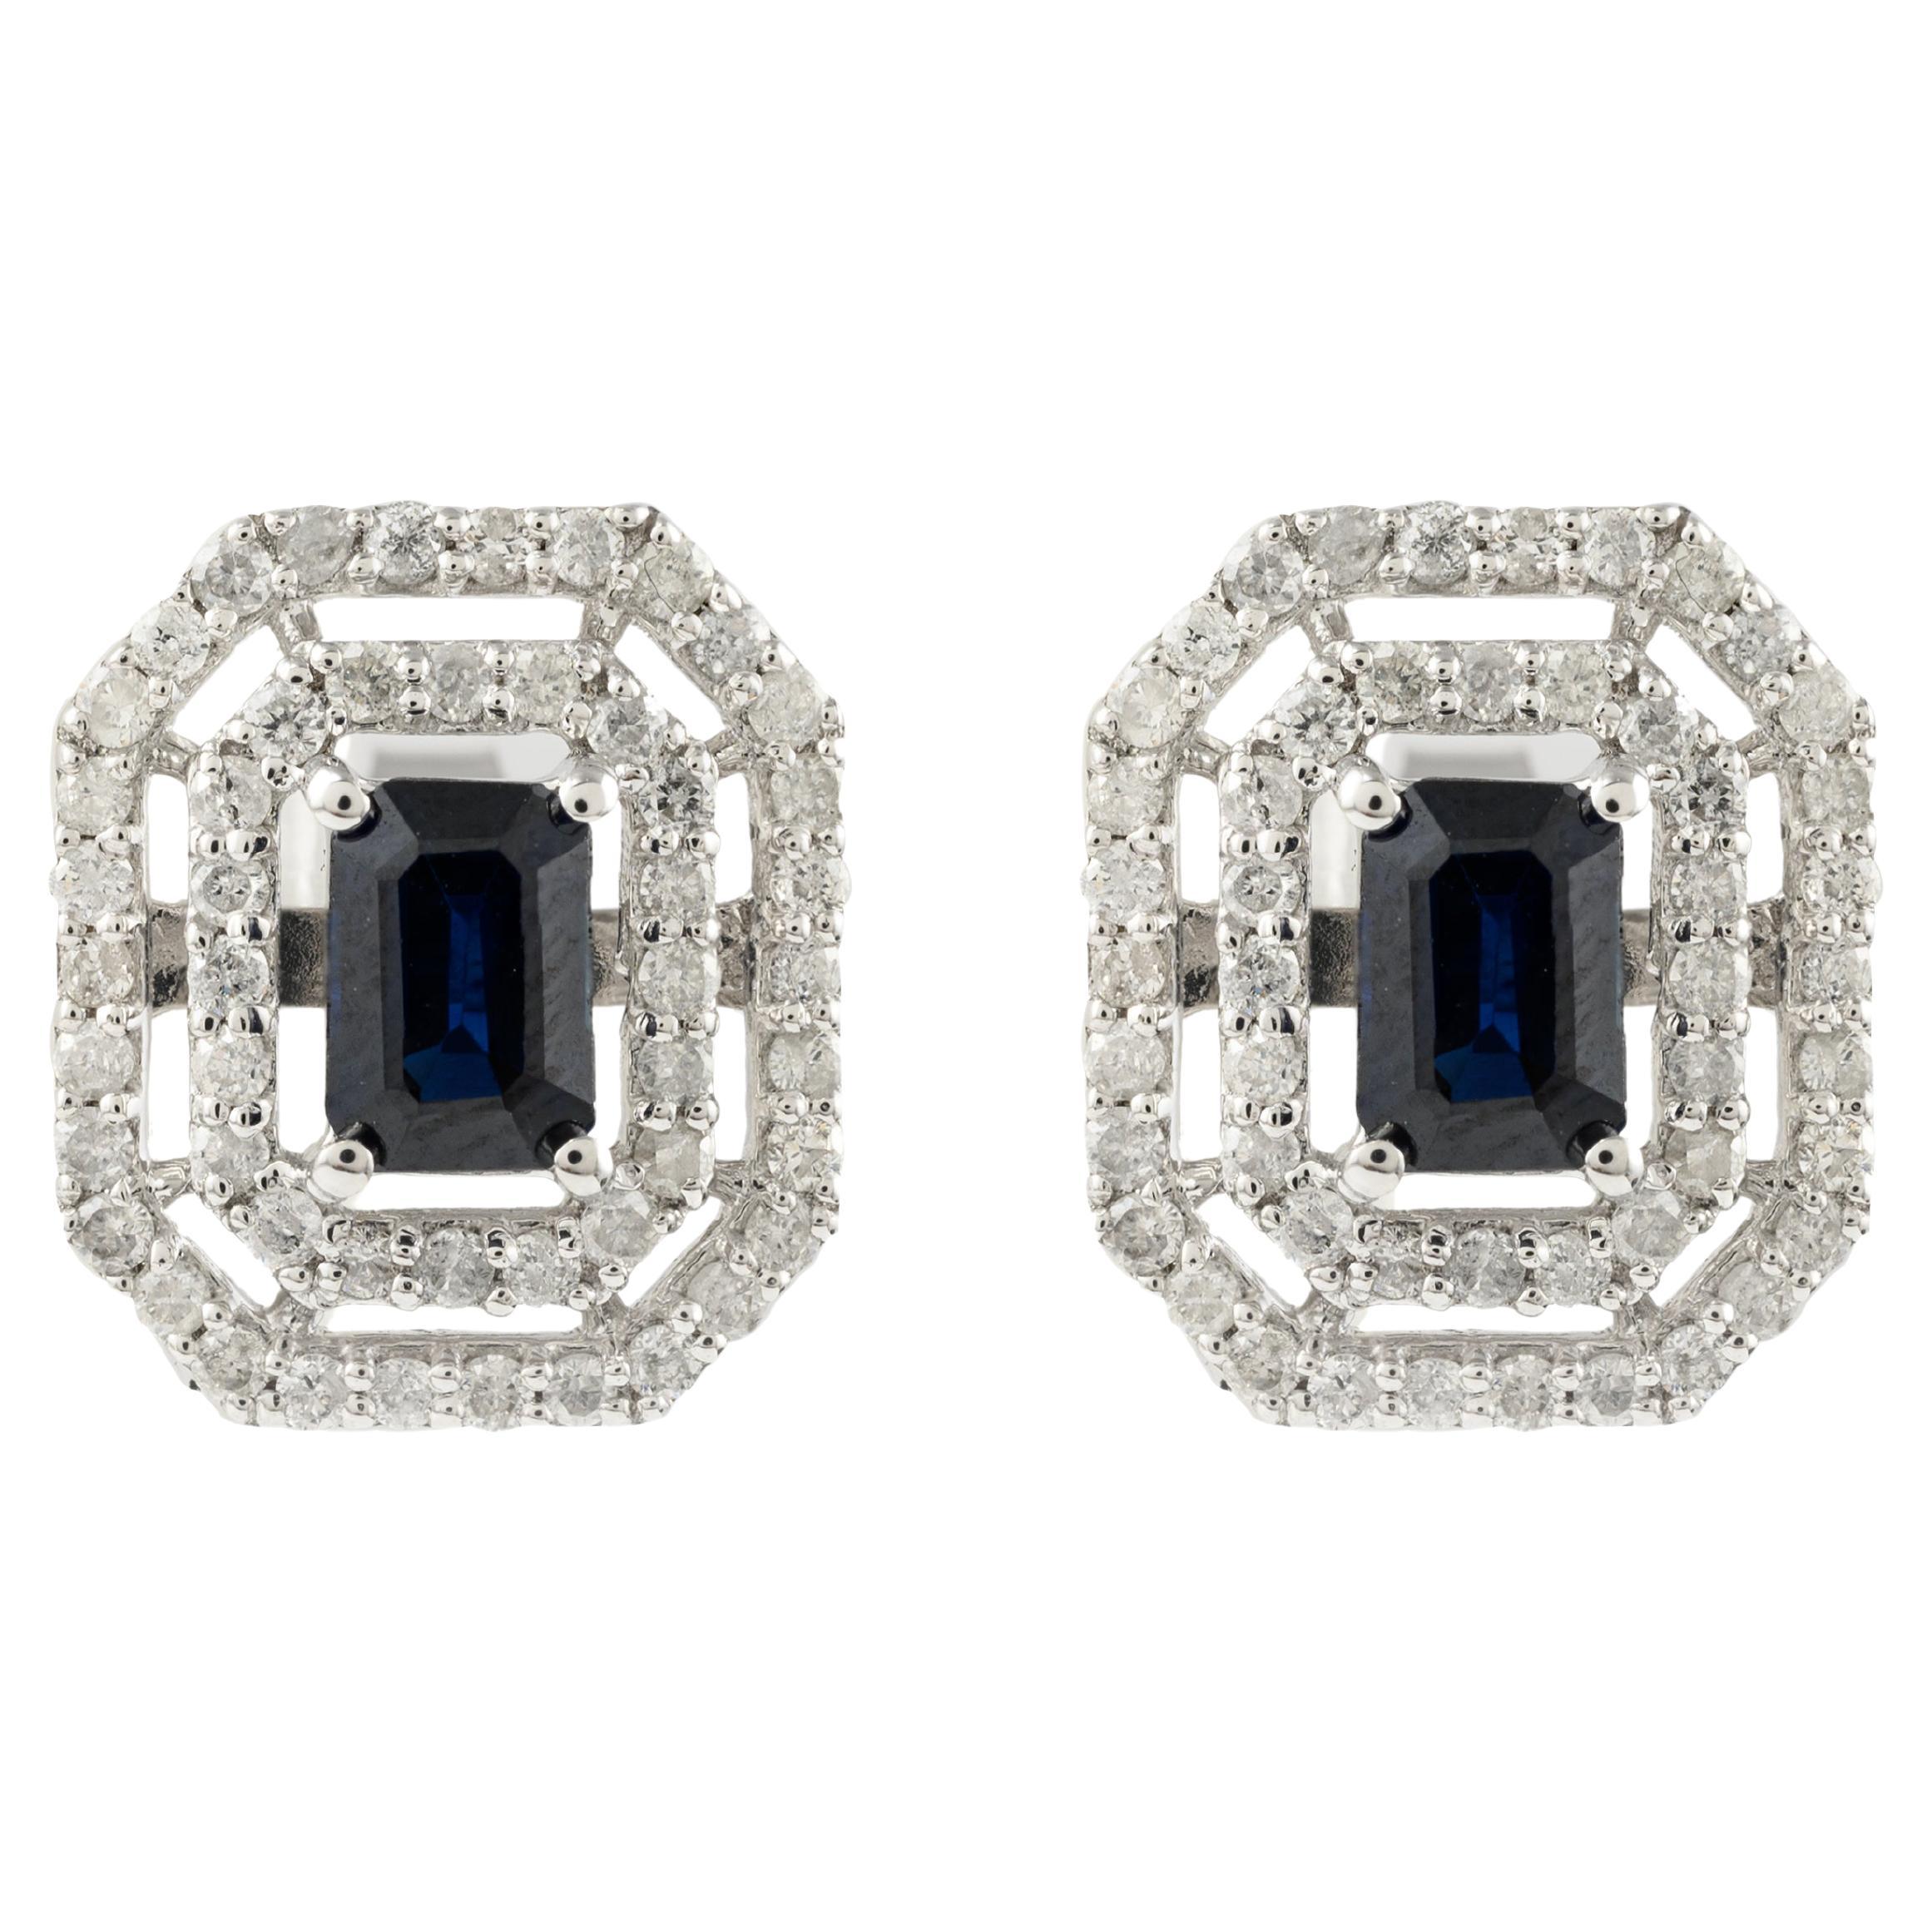 Regal Blue Sapphire Diamond Wedding Stud Earrings Crafted in 14k White Gold